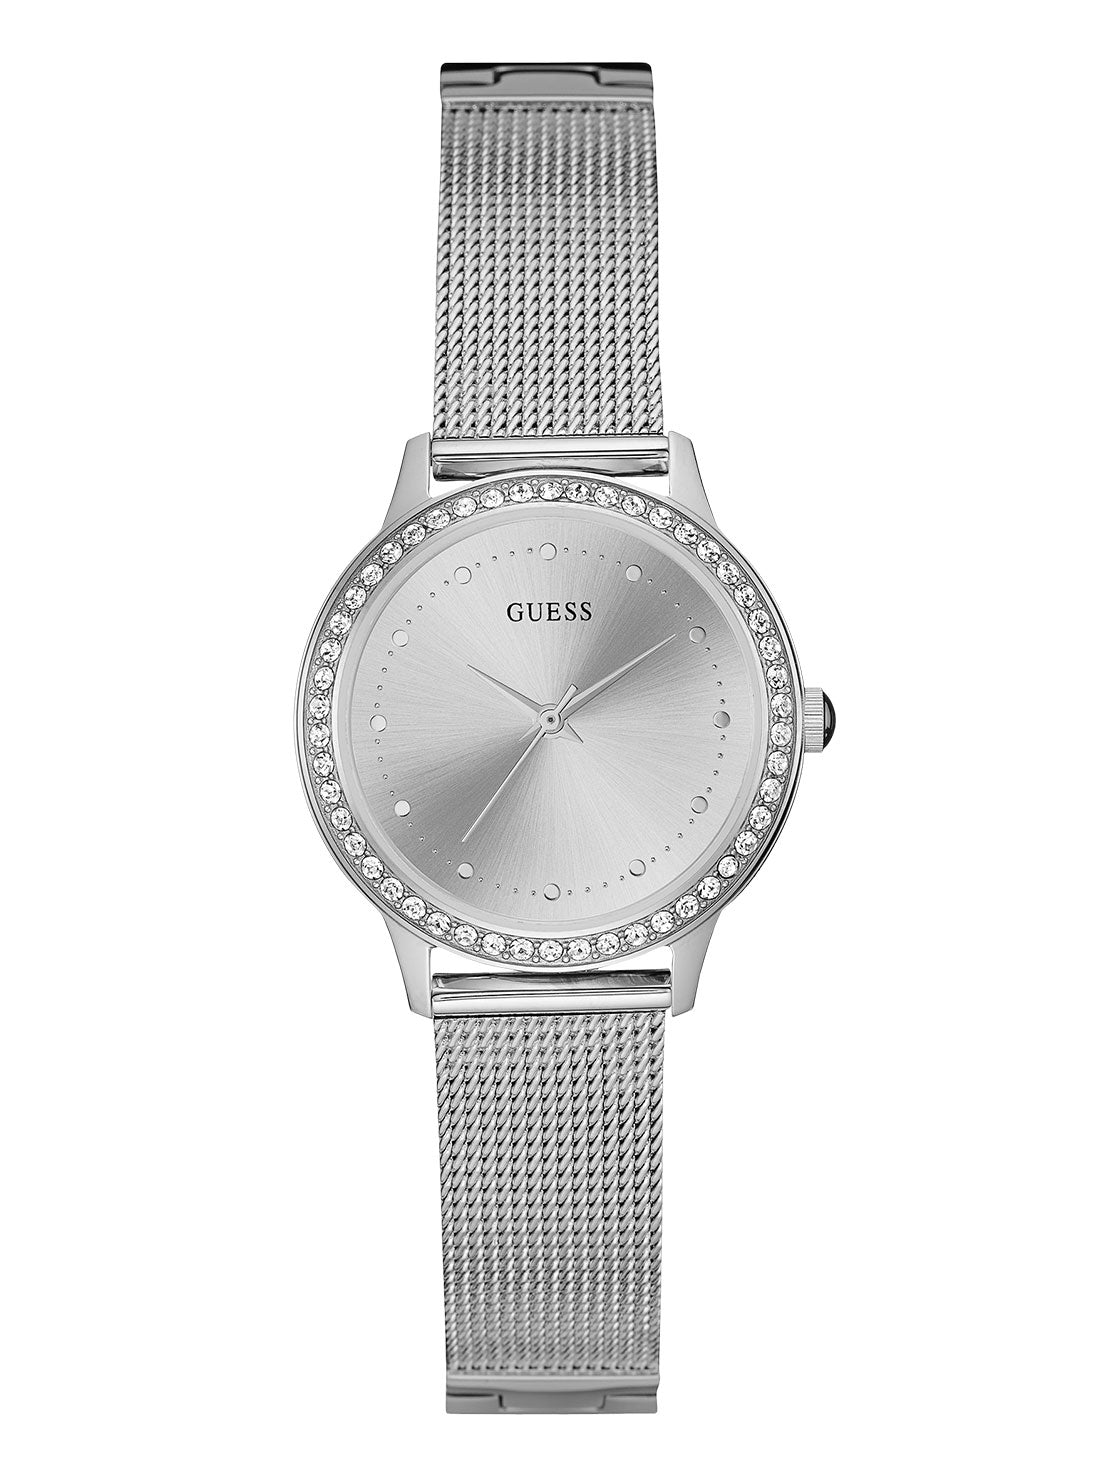 GUESS Womens Silver Chelsea Mesh Watch W0647L6 Front View